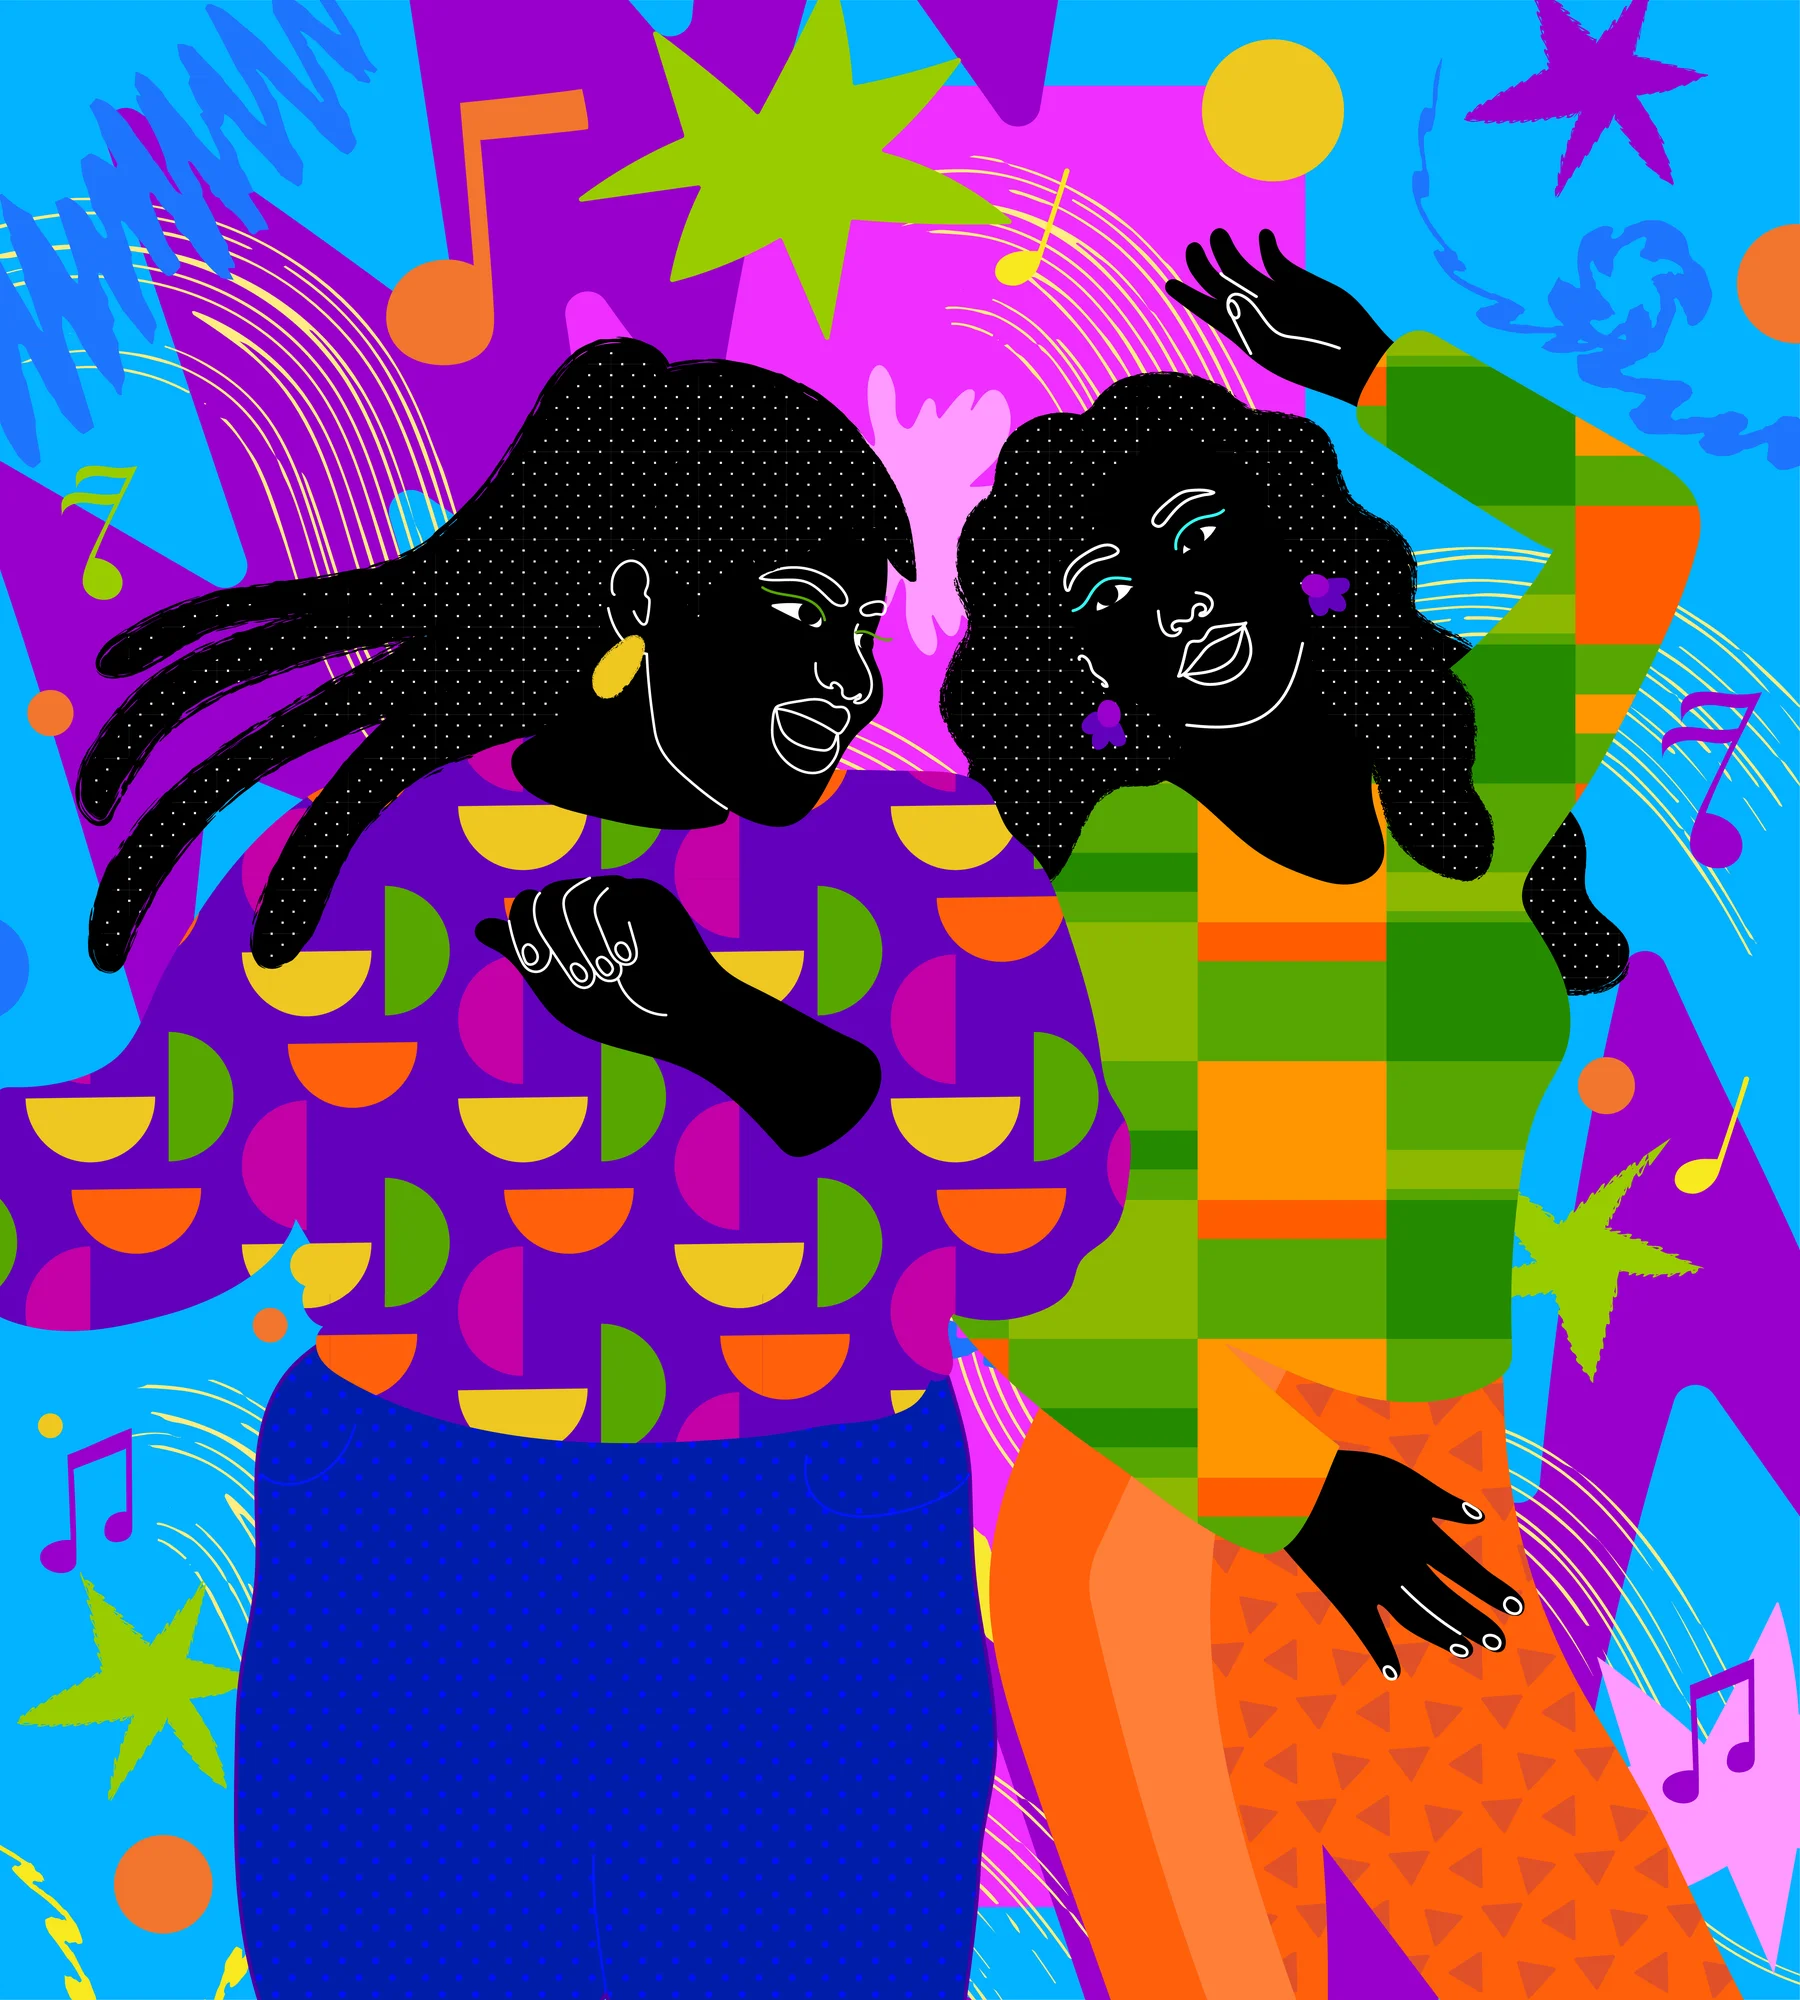 Two women are dancing in the center, wearing blue and orange pants and tops with colorful geometric designs. Light blue, purple and orange and green music notes float in the background.